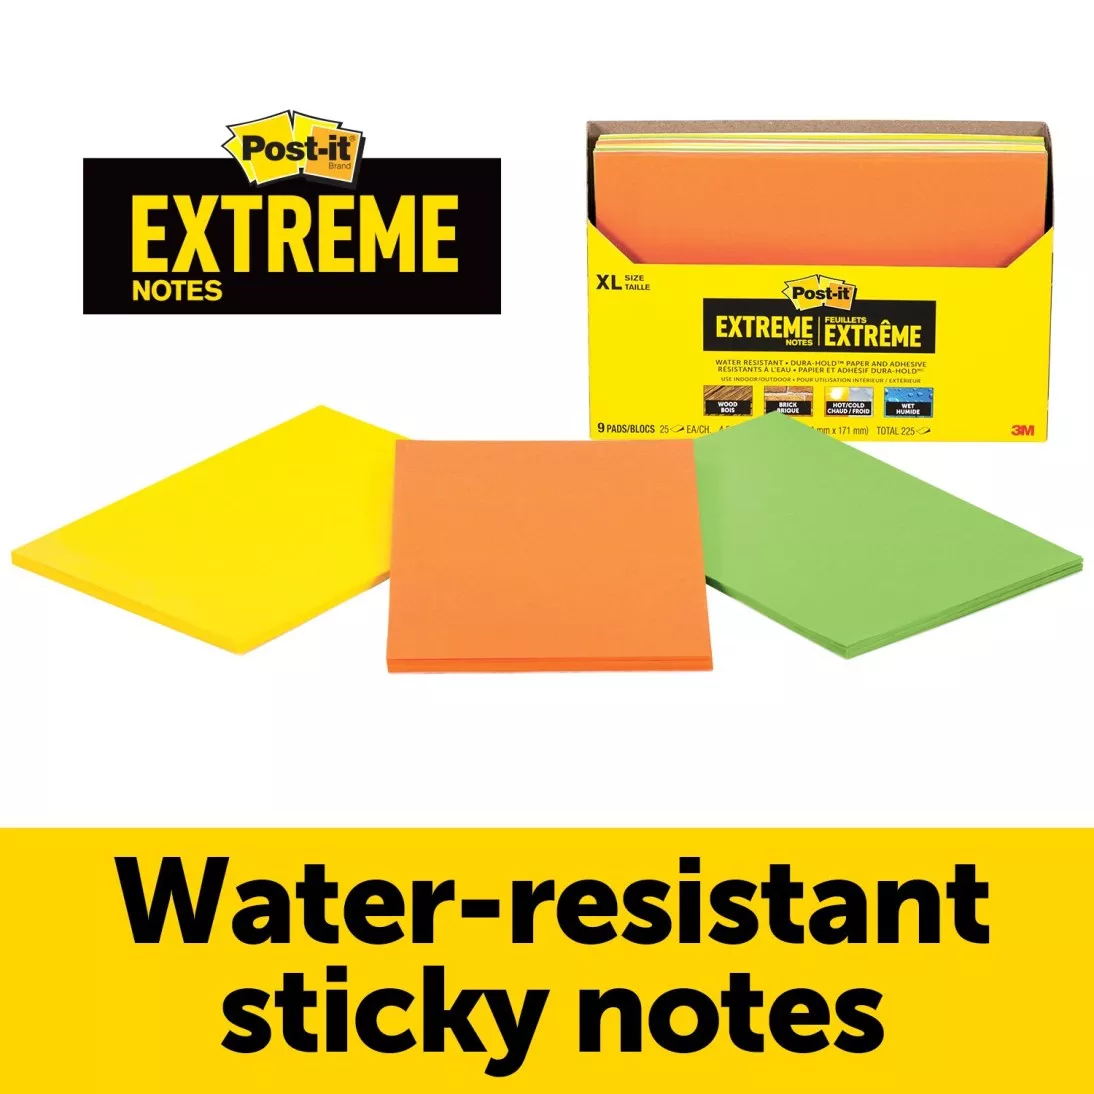 Post-it® Extreme Notes EXT456-9CT, 4.5 in x 6.75 in (114 mm x 171 mm)